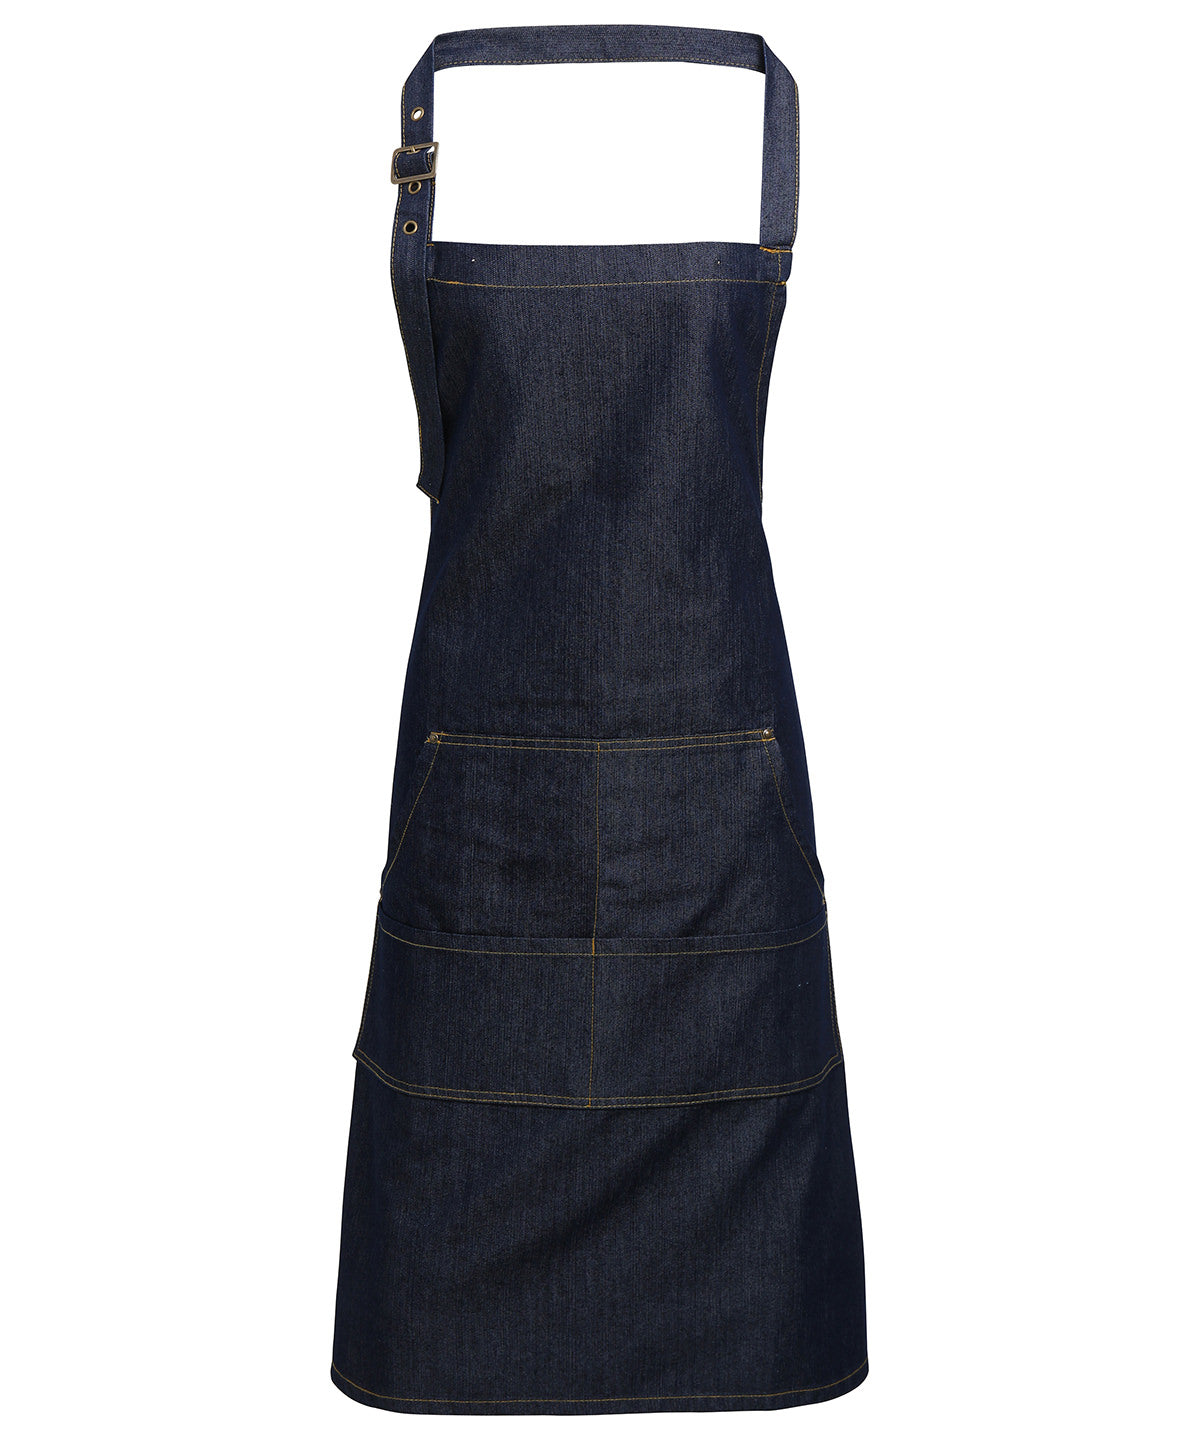 Embroidered Initials Denim Apron - Design Your Own